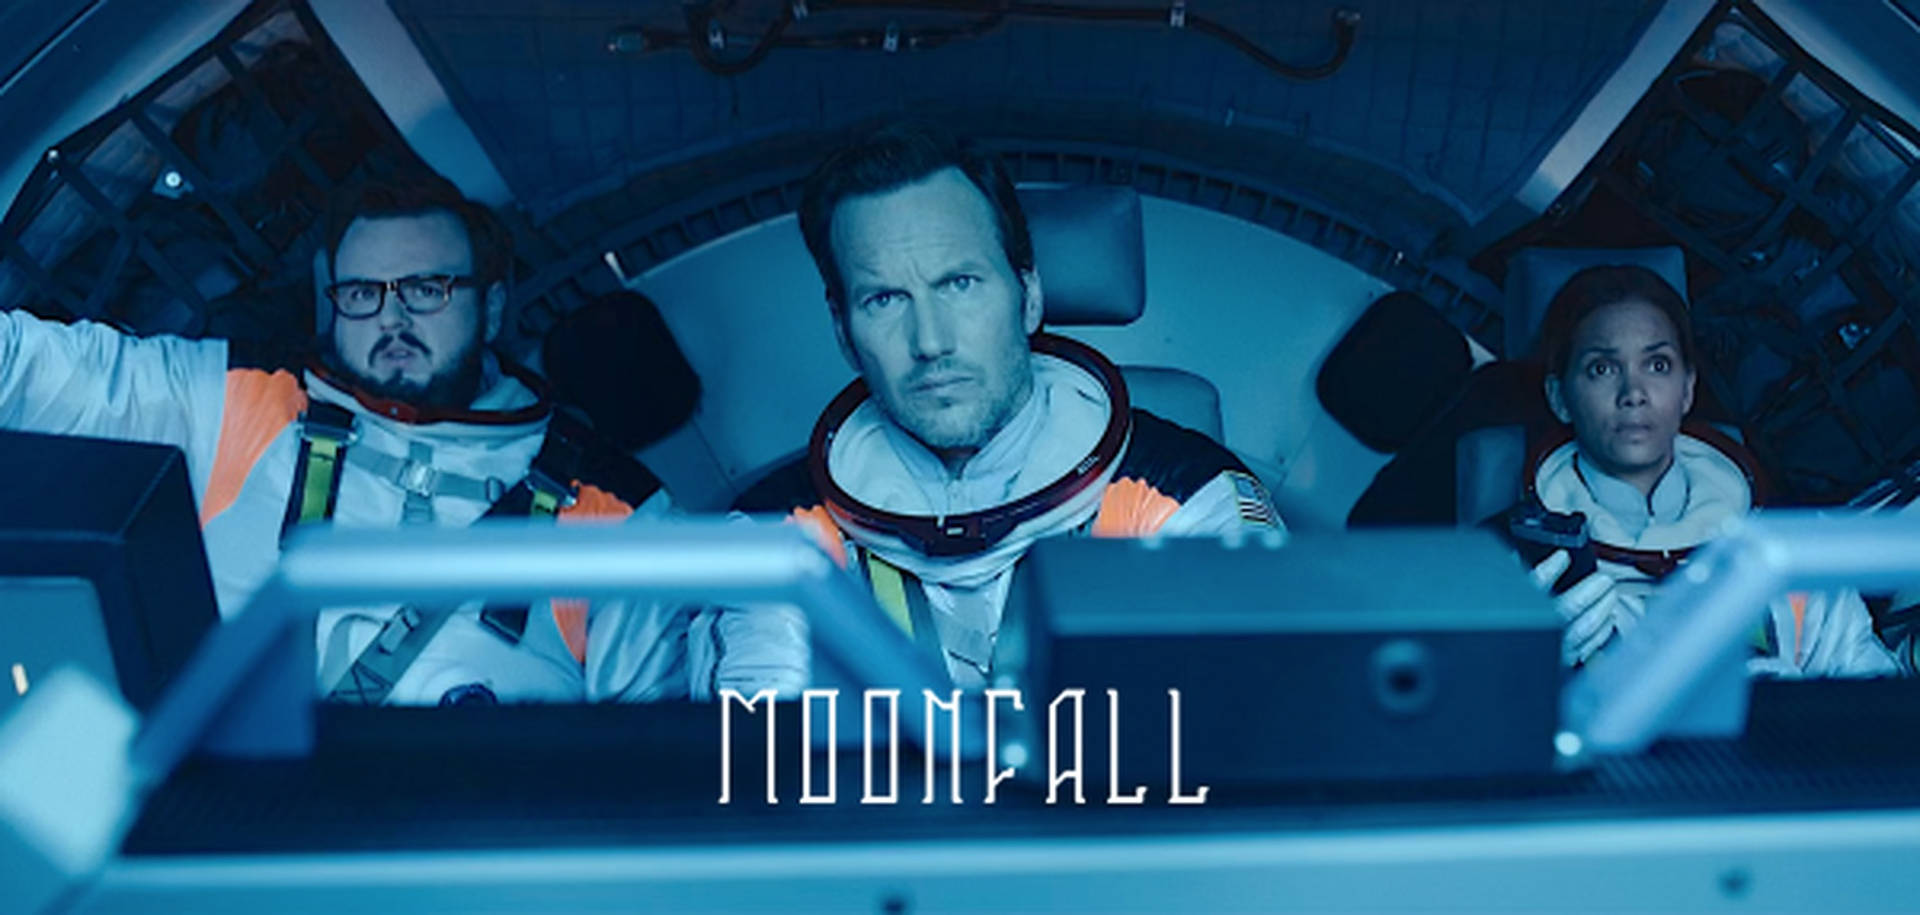 Moonfall Movie - Blue Lit Poster